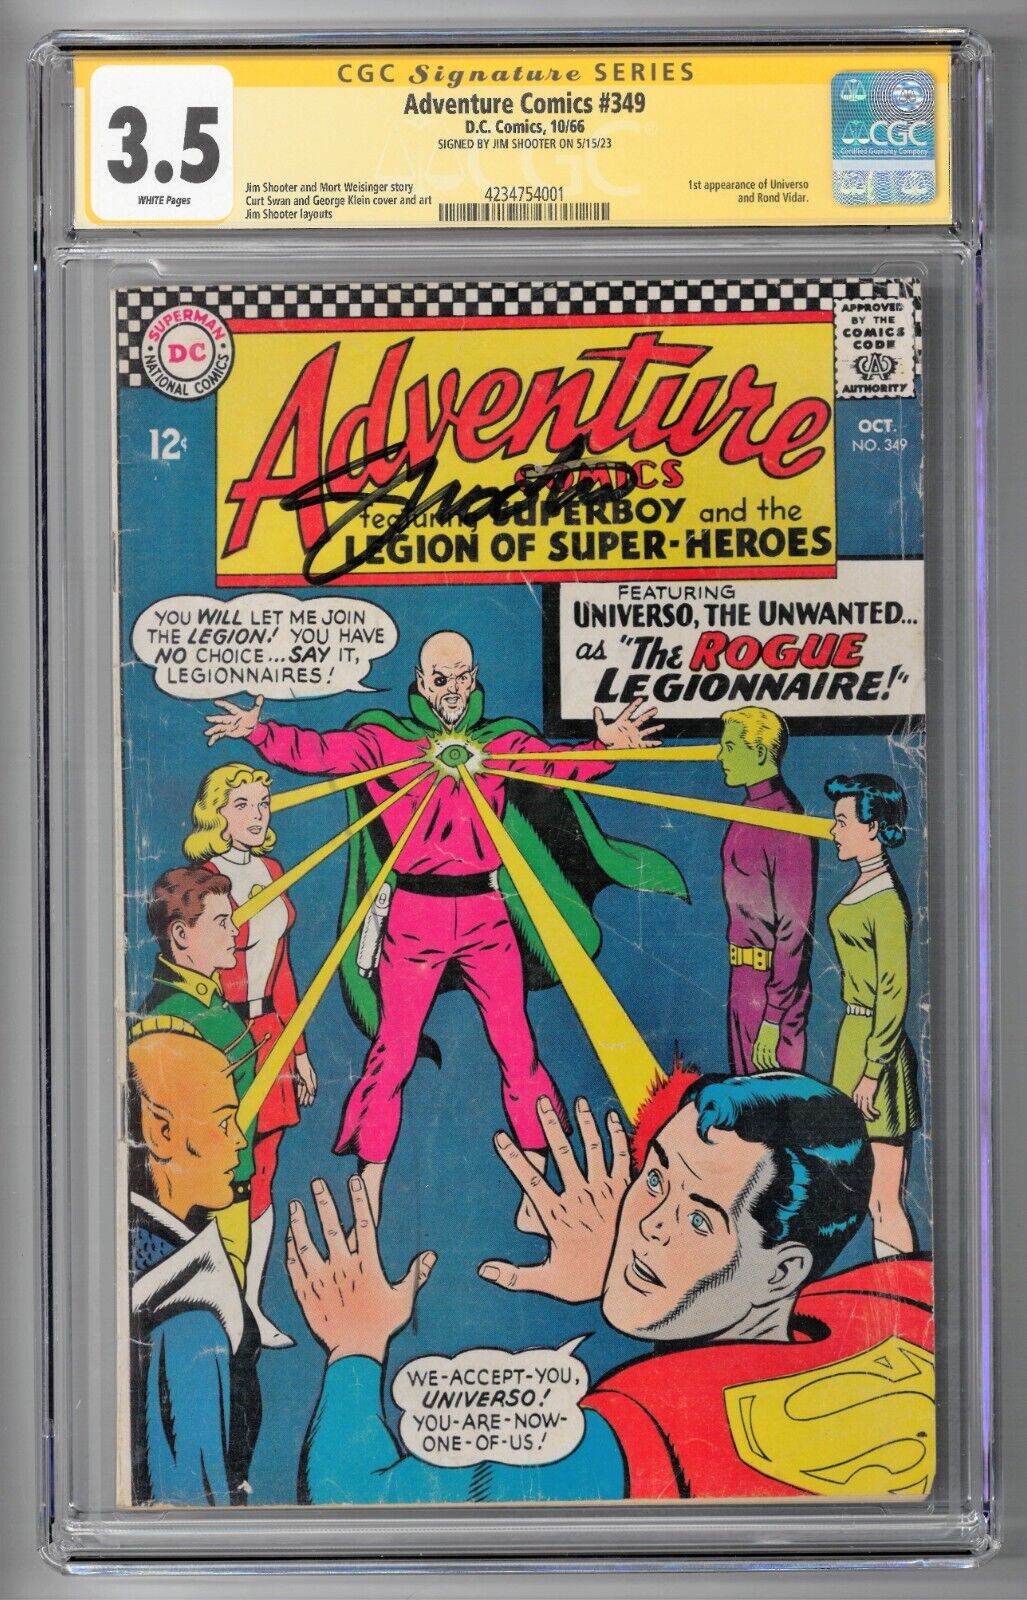 Adventure Comics #349 CGC SS 3.5 (Oct 1966, DC) Signed by Jim Shooter, Superboy